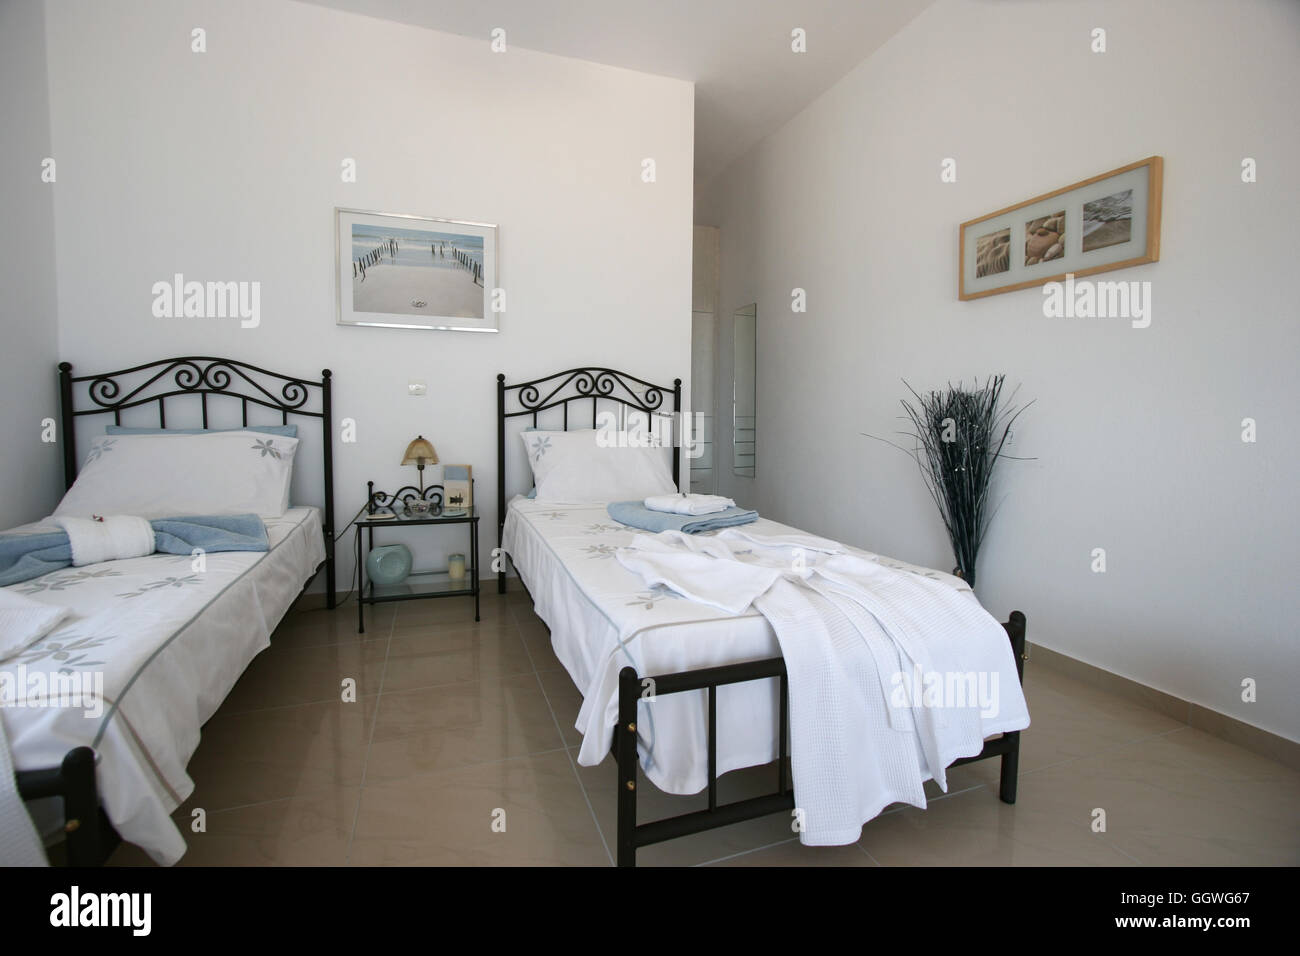 A luxury room in the holiday apartment Stock Photo